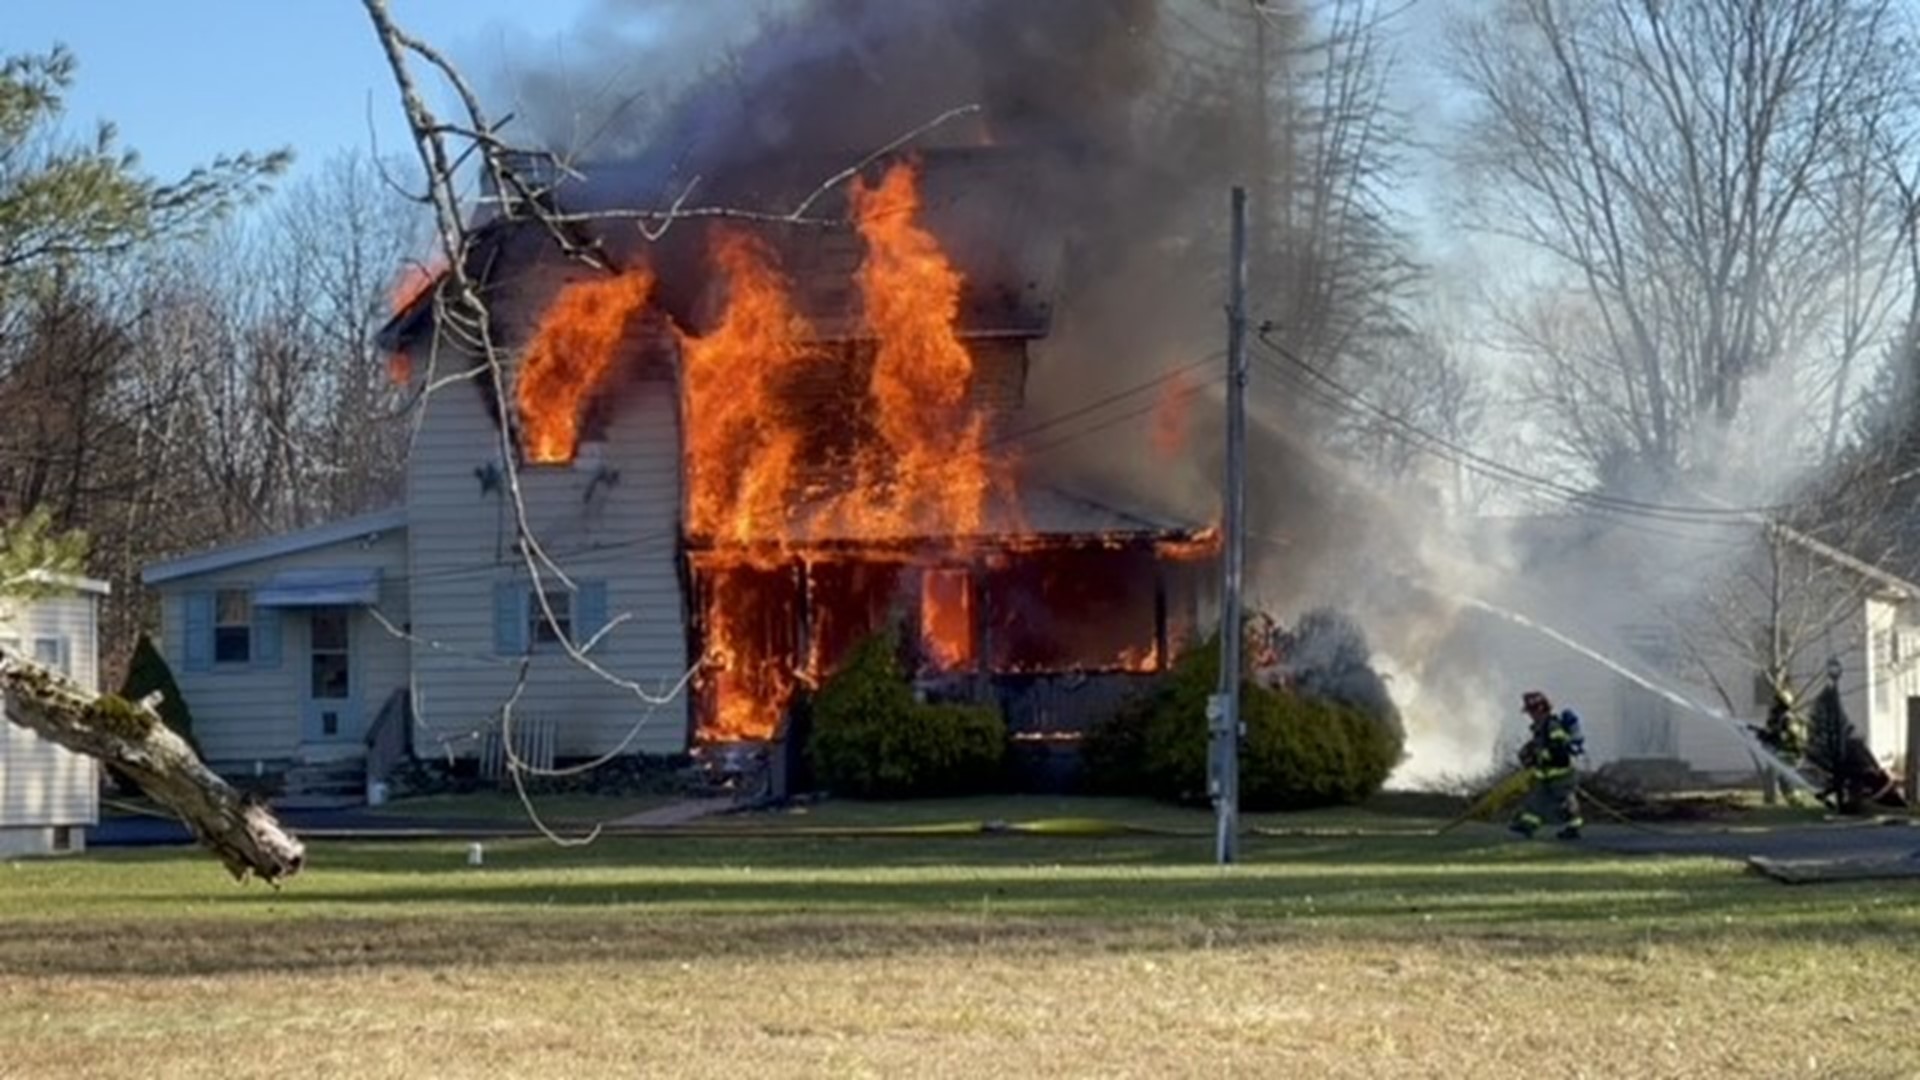 Flames broke out just after 10 a.m. Sunday morning.